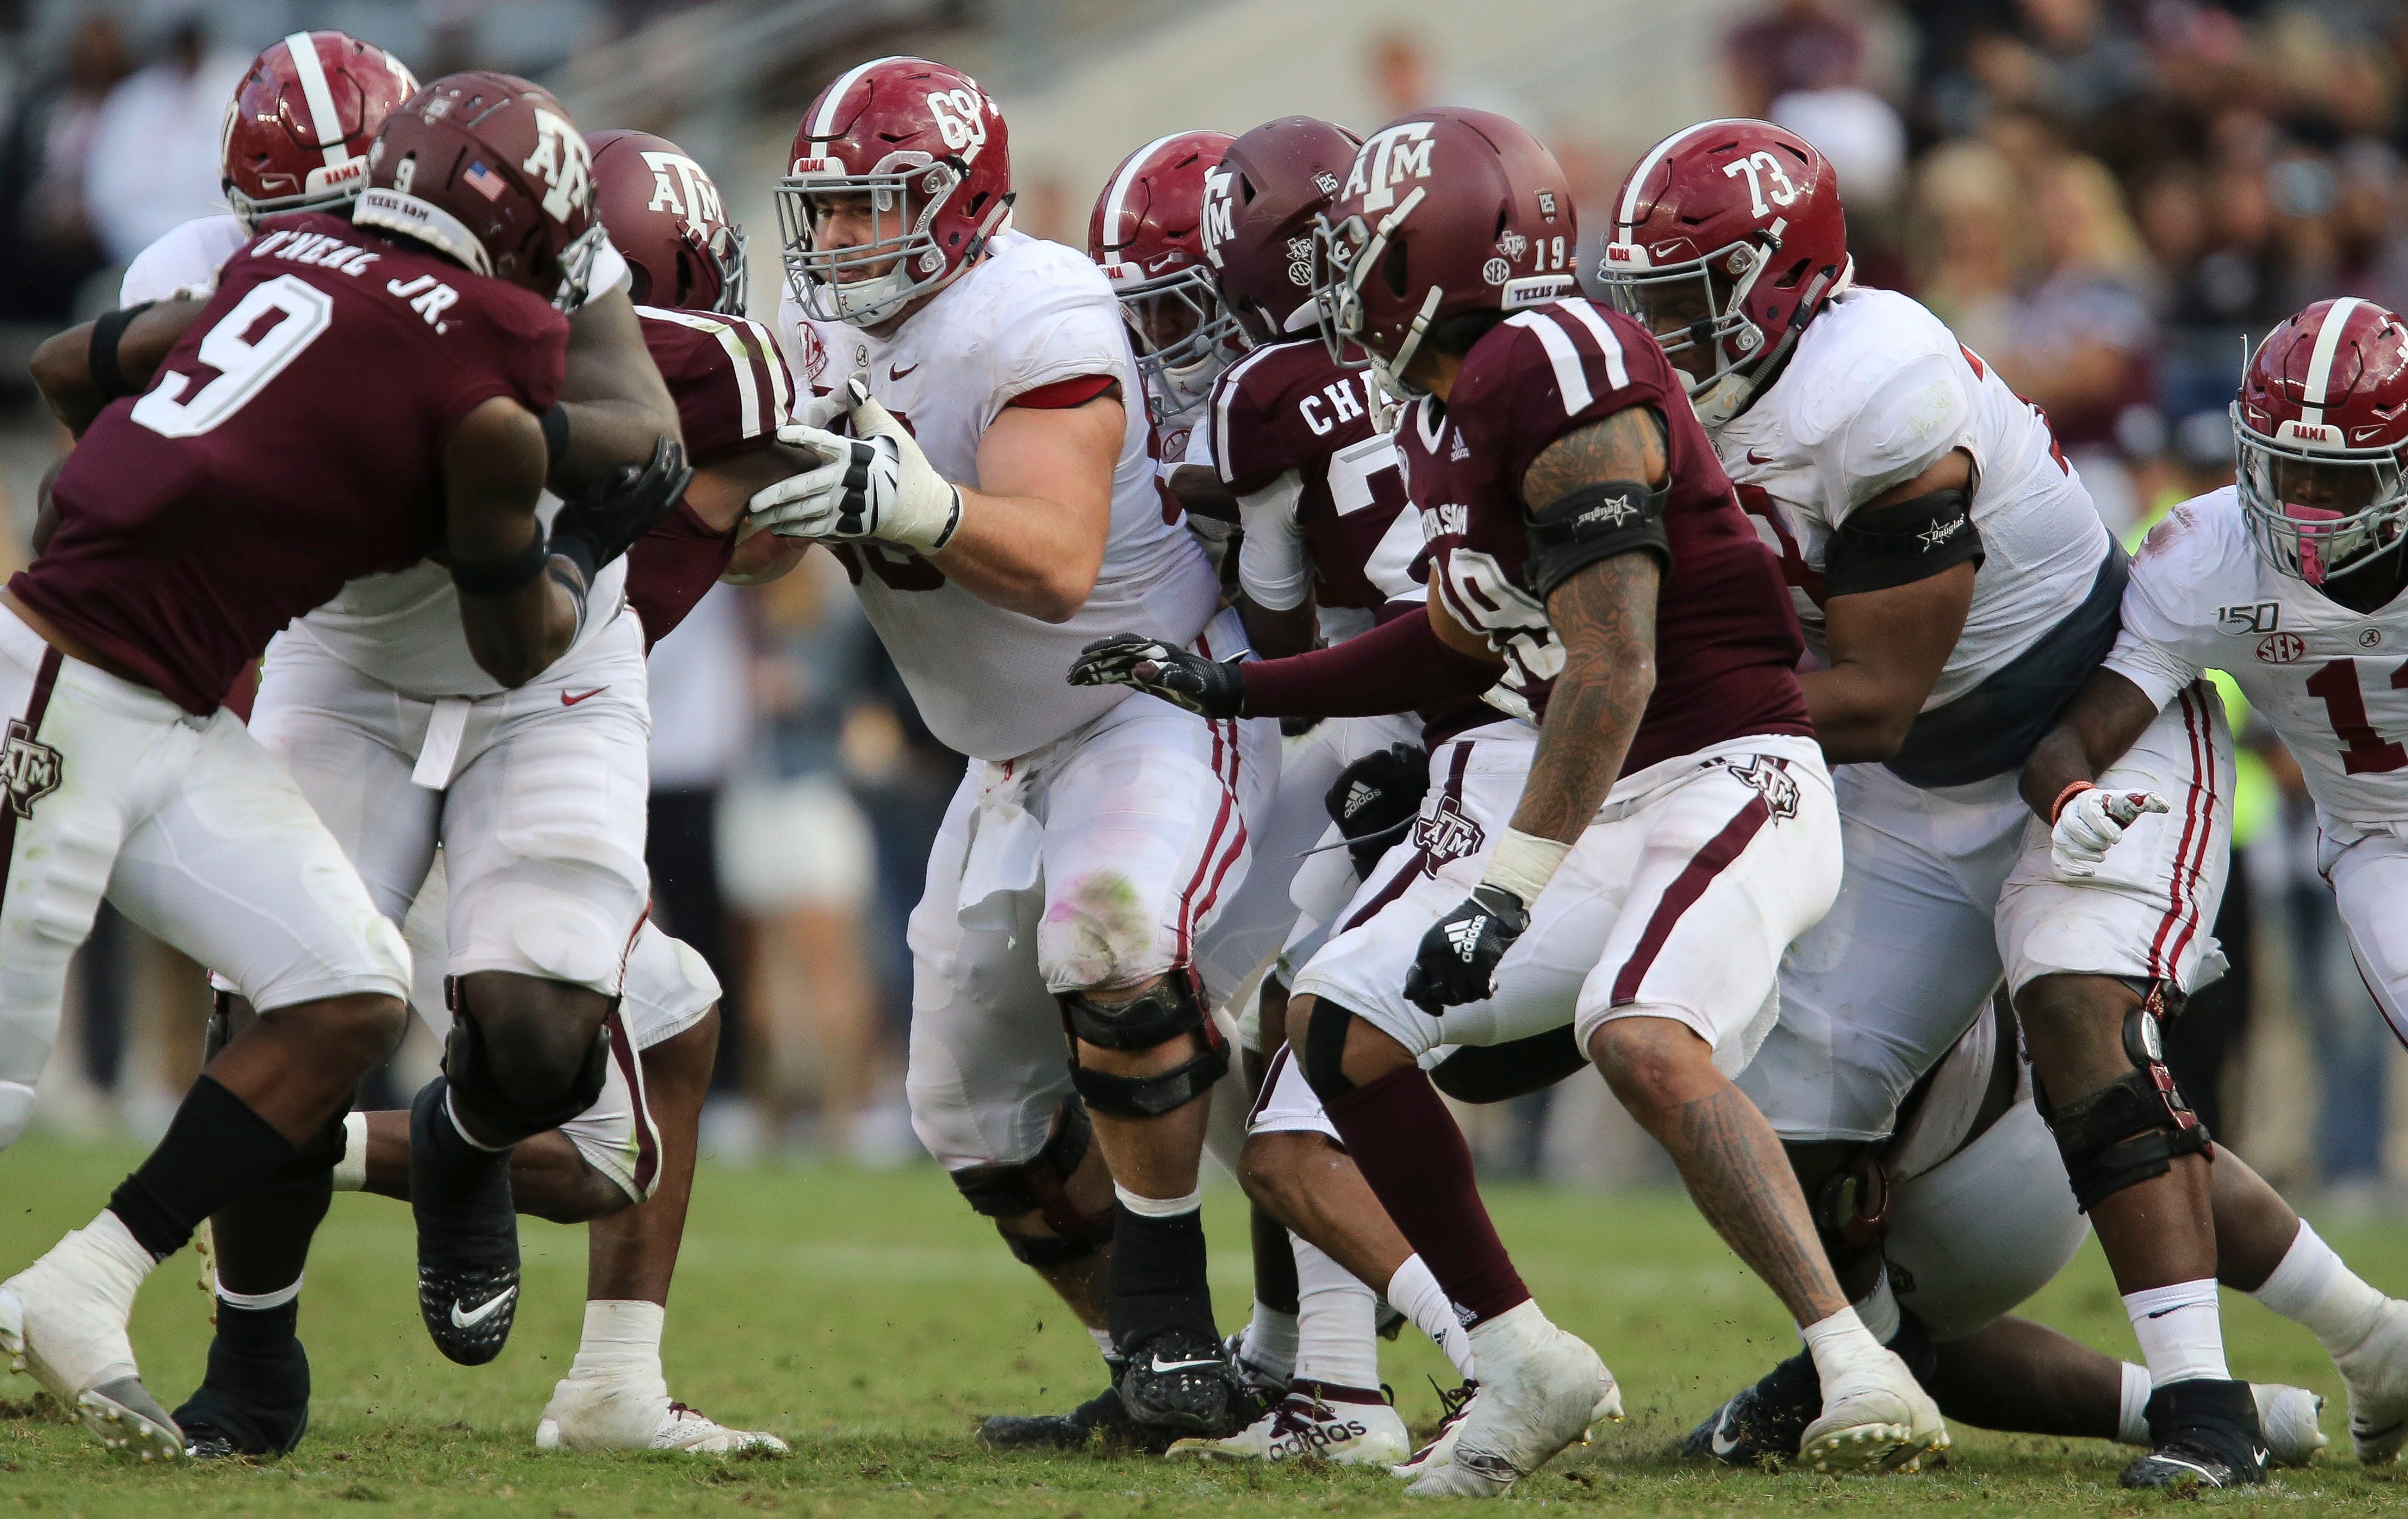 Alabama offensive lineman Landon Dickerson (69) blocks against Texas A&M during the second half of Alabama's 47-28 victory at Kyle Field Saturday, Oct. 12, 2019 in College Station, Texas. [Staff Photo/Gary Cosby Jr.]